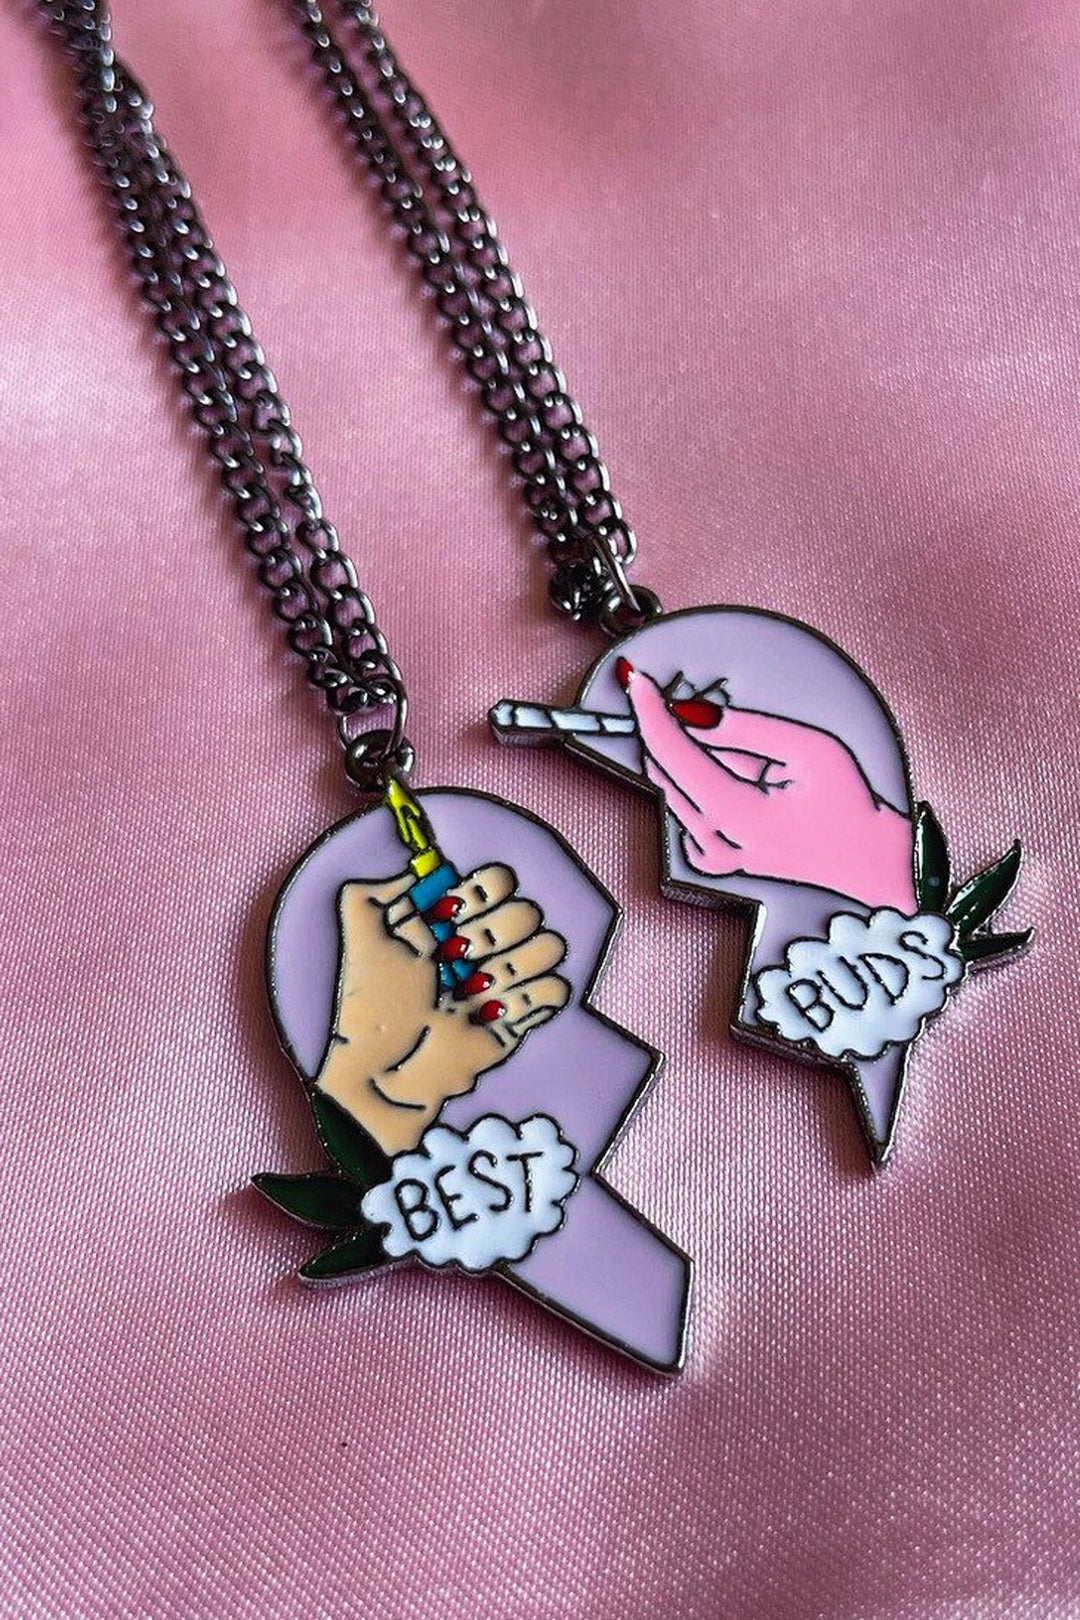 Best Buds Necklace - The SWL Store 